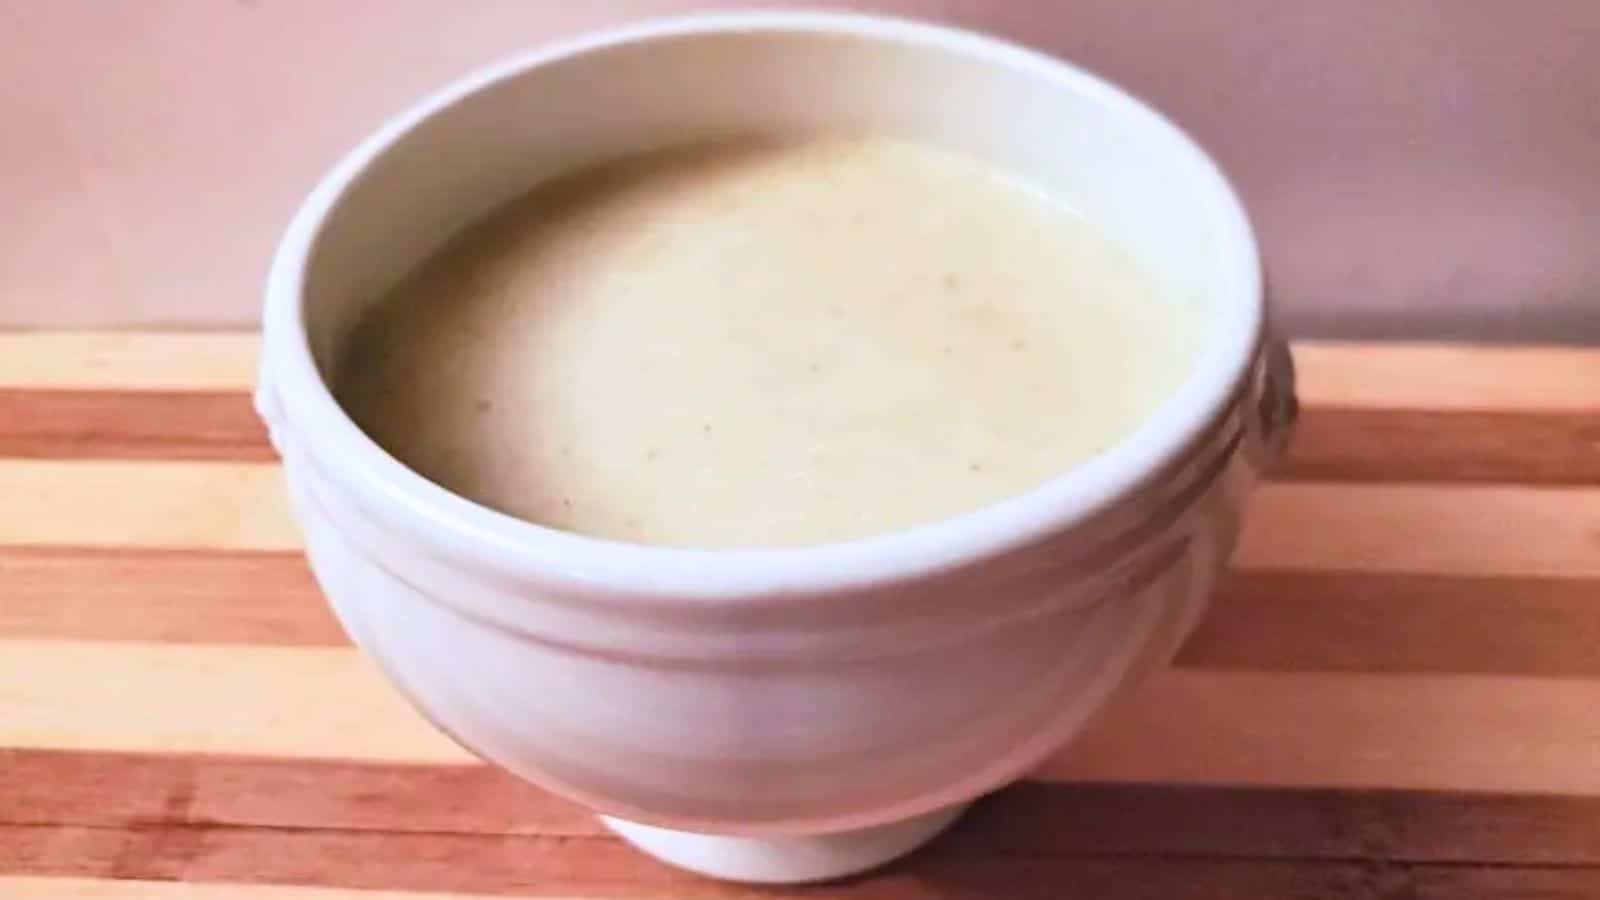 Image shows A white cup of cream of celery soup on a wooden cutting board.